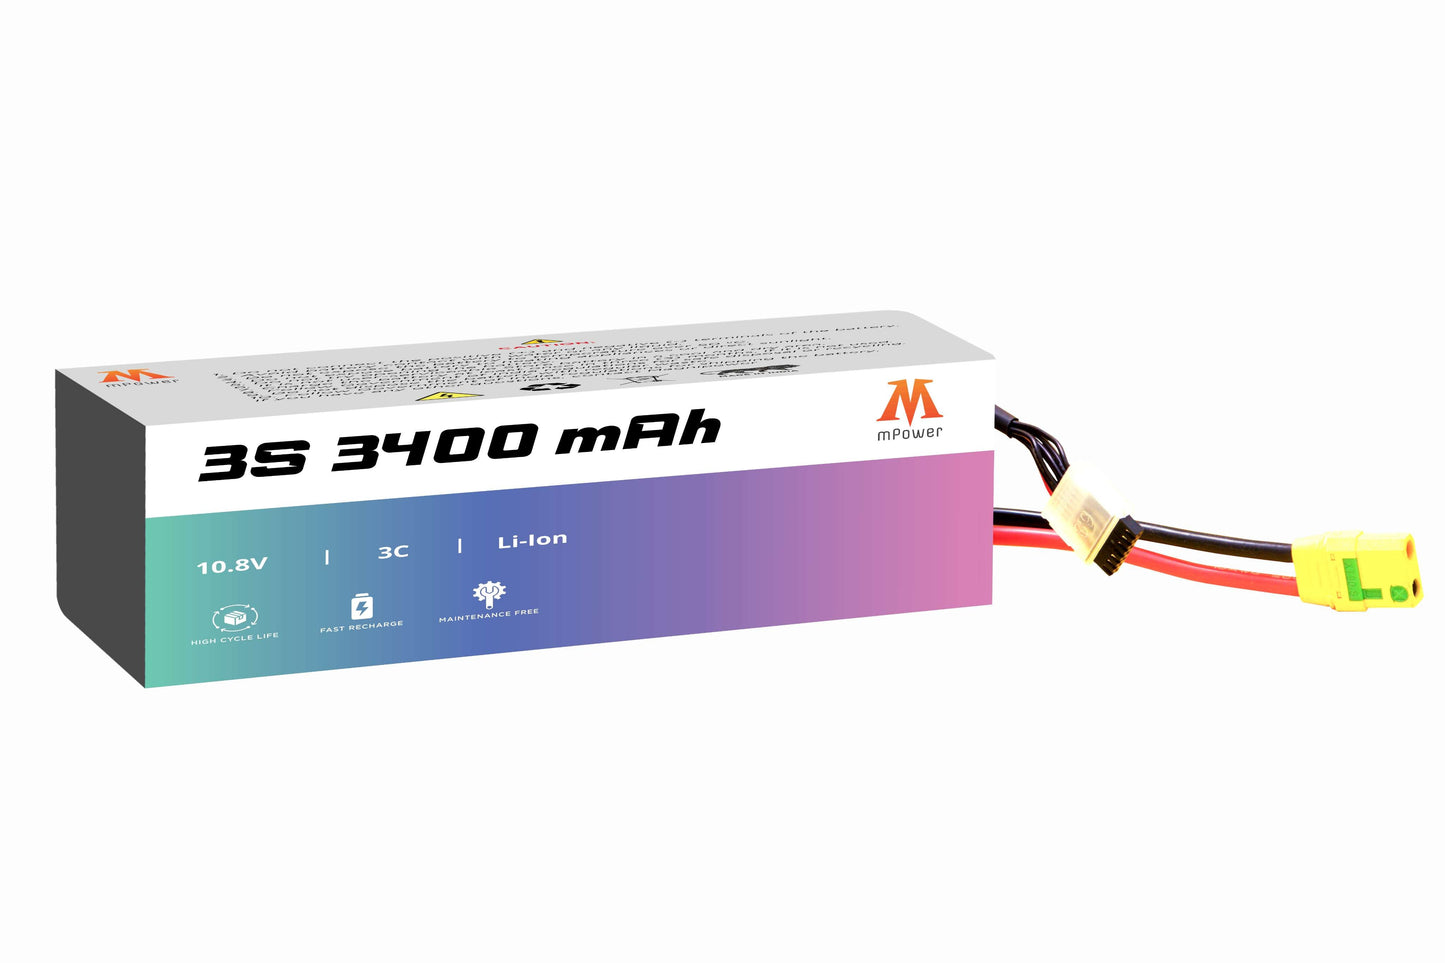 mPower 3S 3400mAh Lithium-Ion Battery for Survey Drones-mpowerlithium